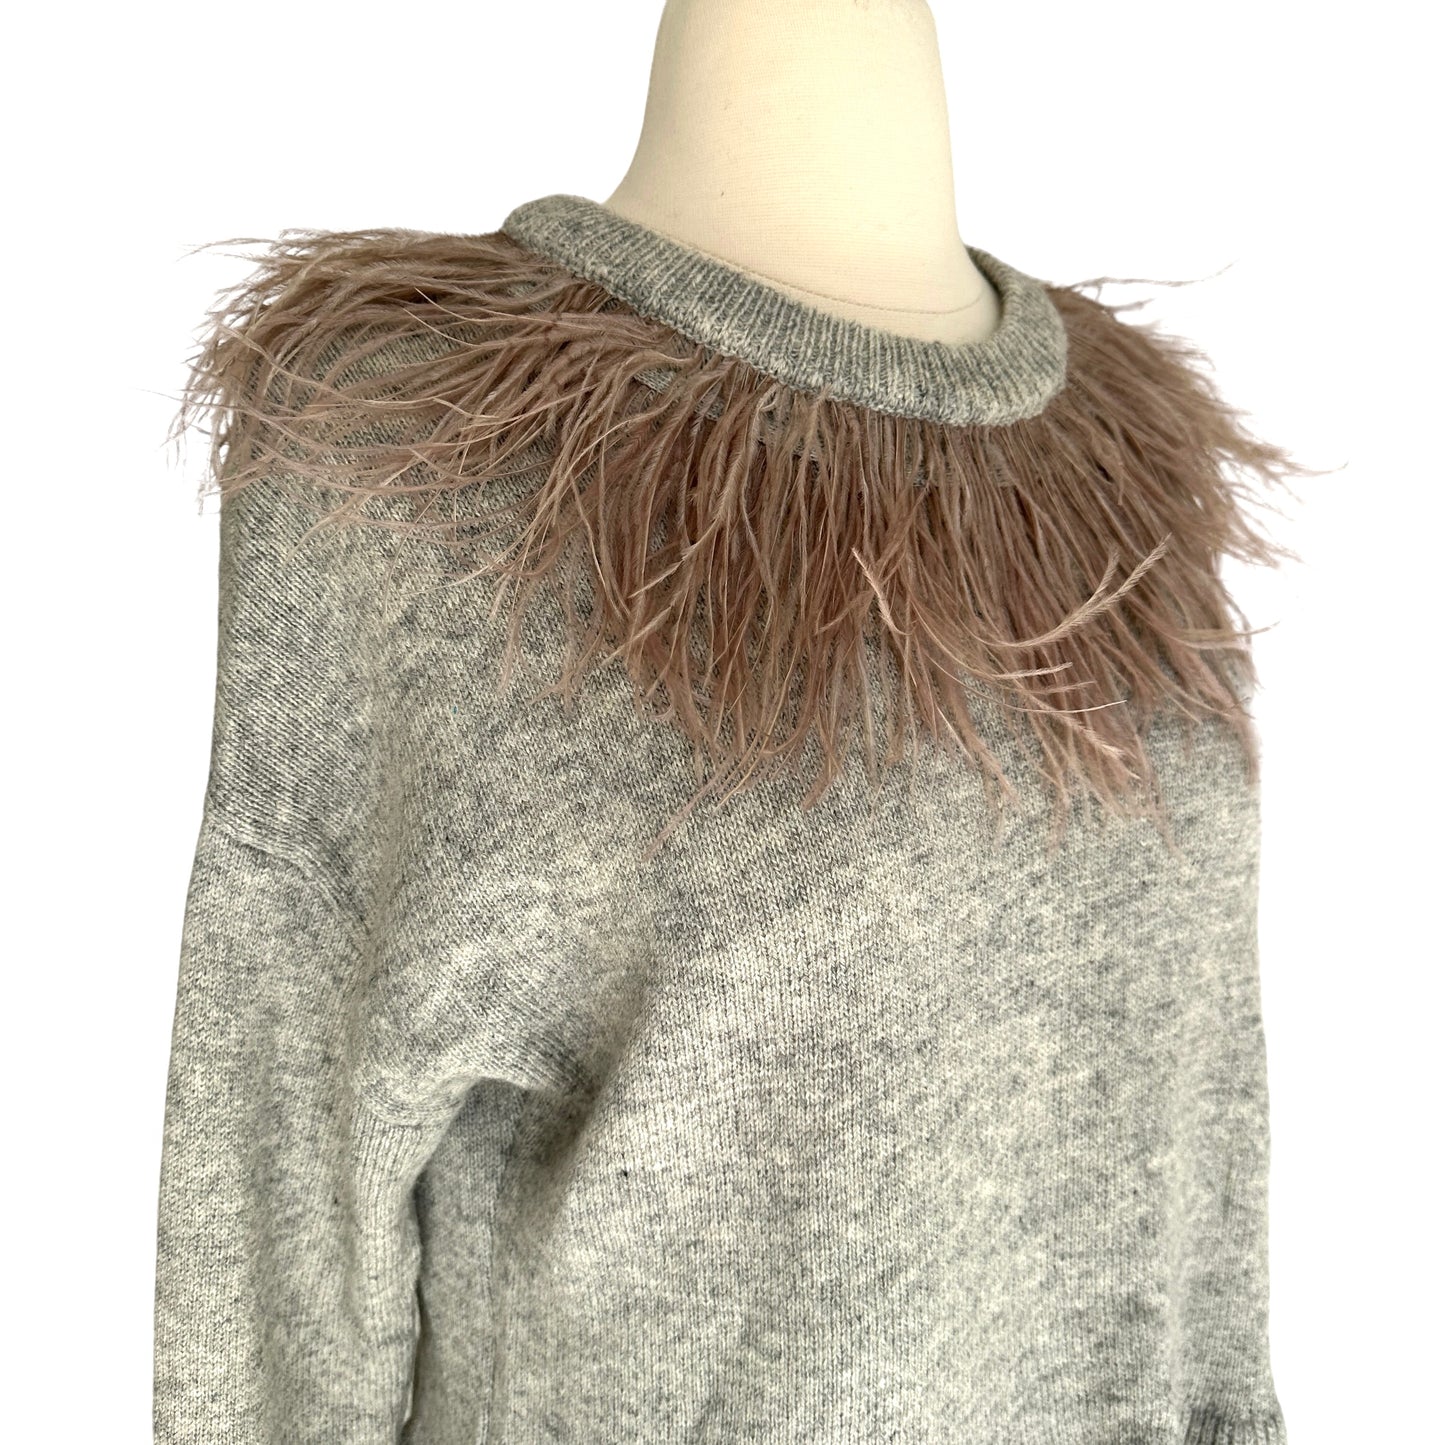 Feather Grey Sweater - S